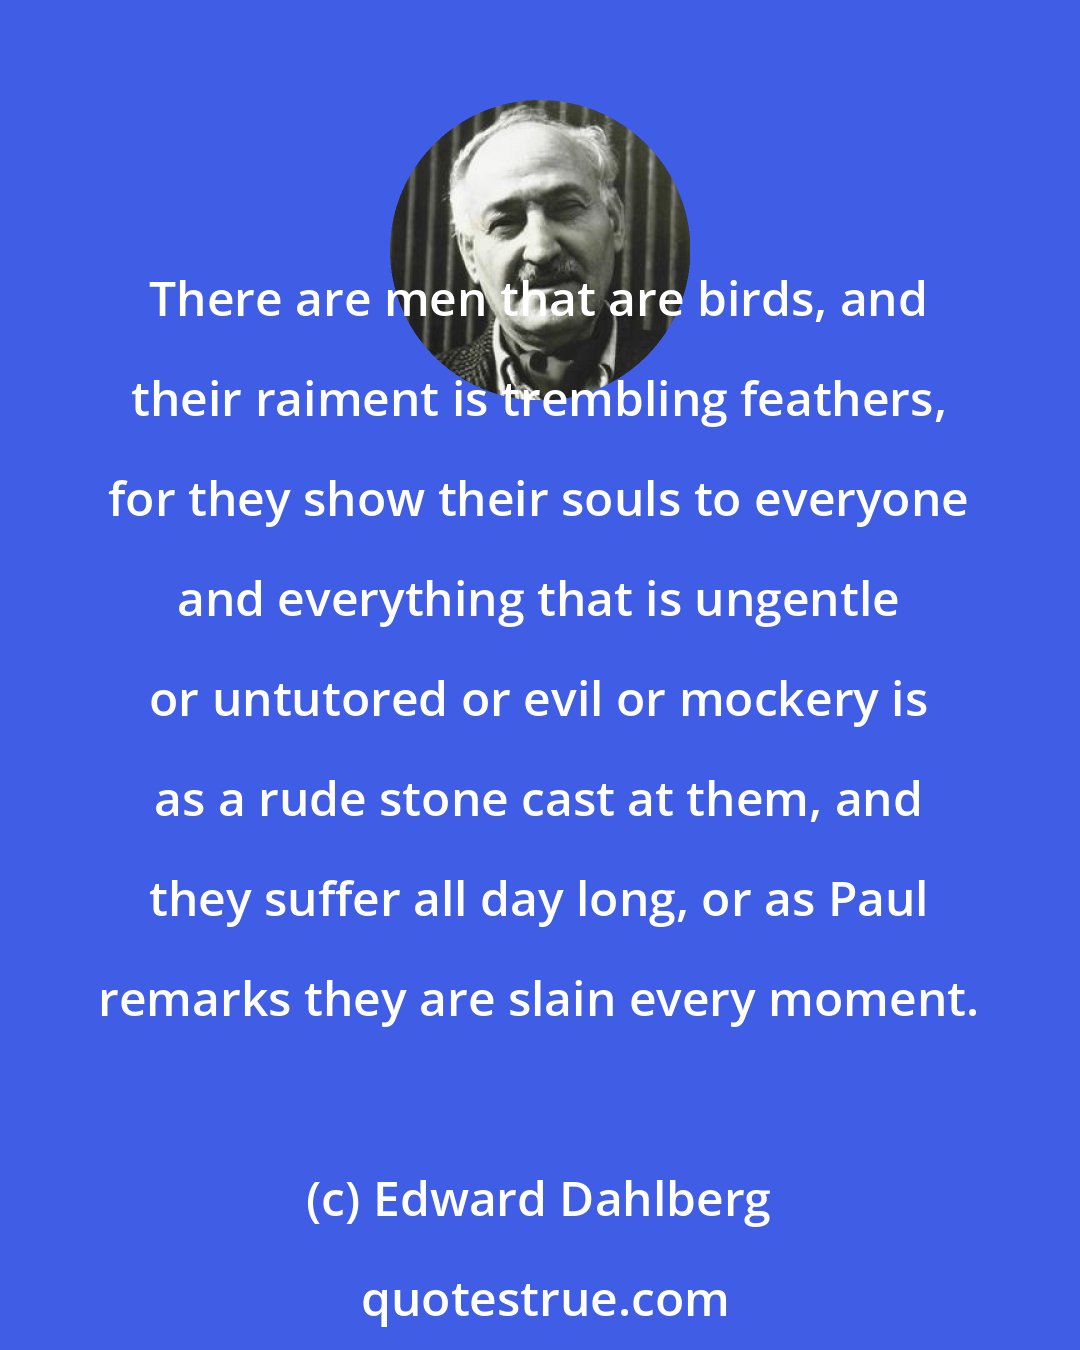 Edward Dahlberg: There are men that are birds, and their raiment is trembling feathers, for they show their souls to everyone and everything that is ungentle or untutored or evil or mockery is as a rude stone cast at them, and they suffer all day long, or as Paul remarks they are slain every moment.